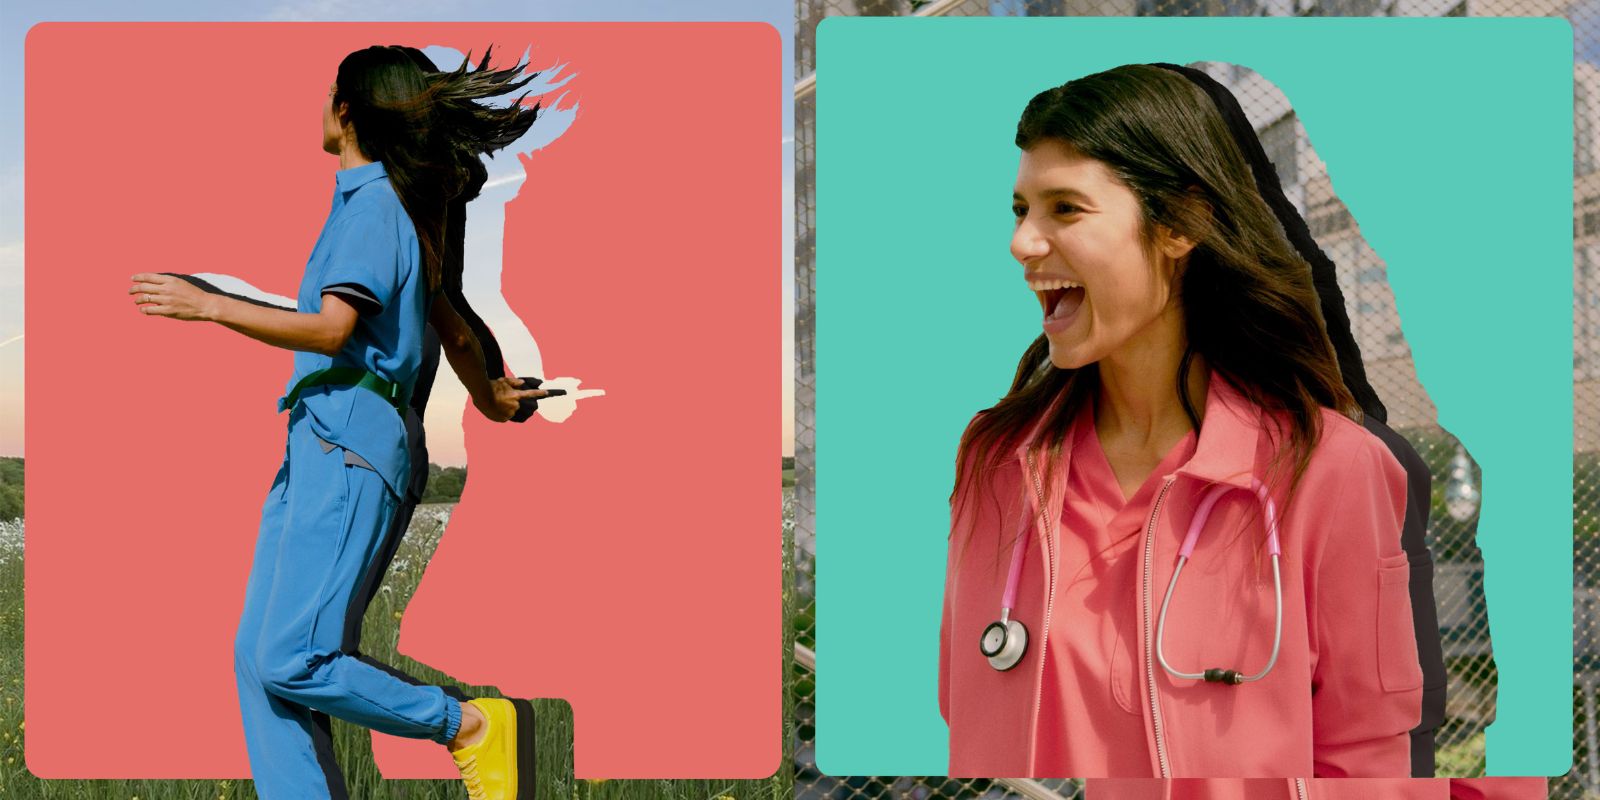 Split-image of a woman in scrubs running and another smiling in a medical coat.